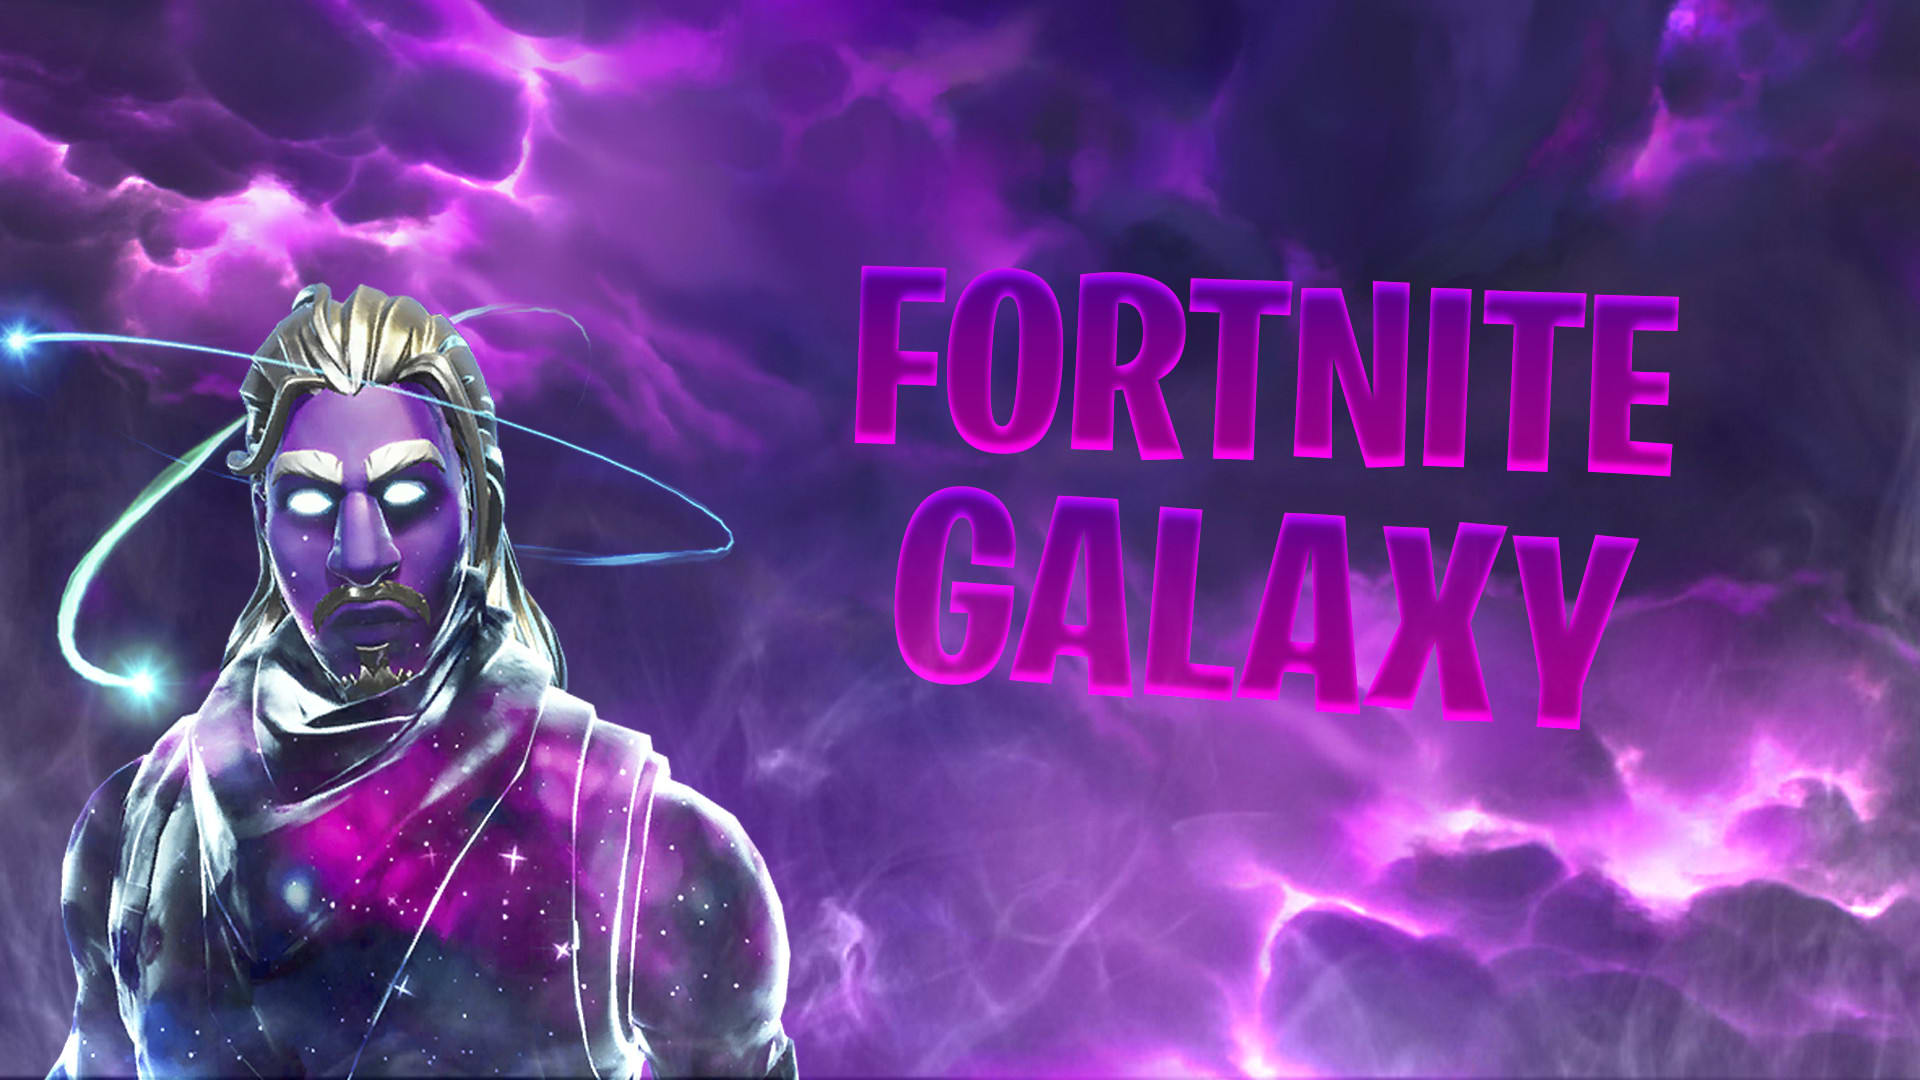 Do Fortnite Gfx And Customized Gfx Banners And Logo By Fuzionvapes